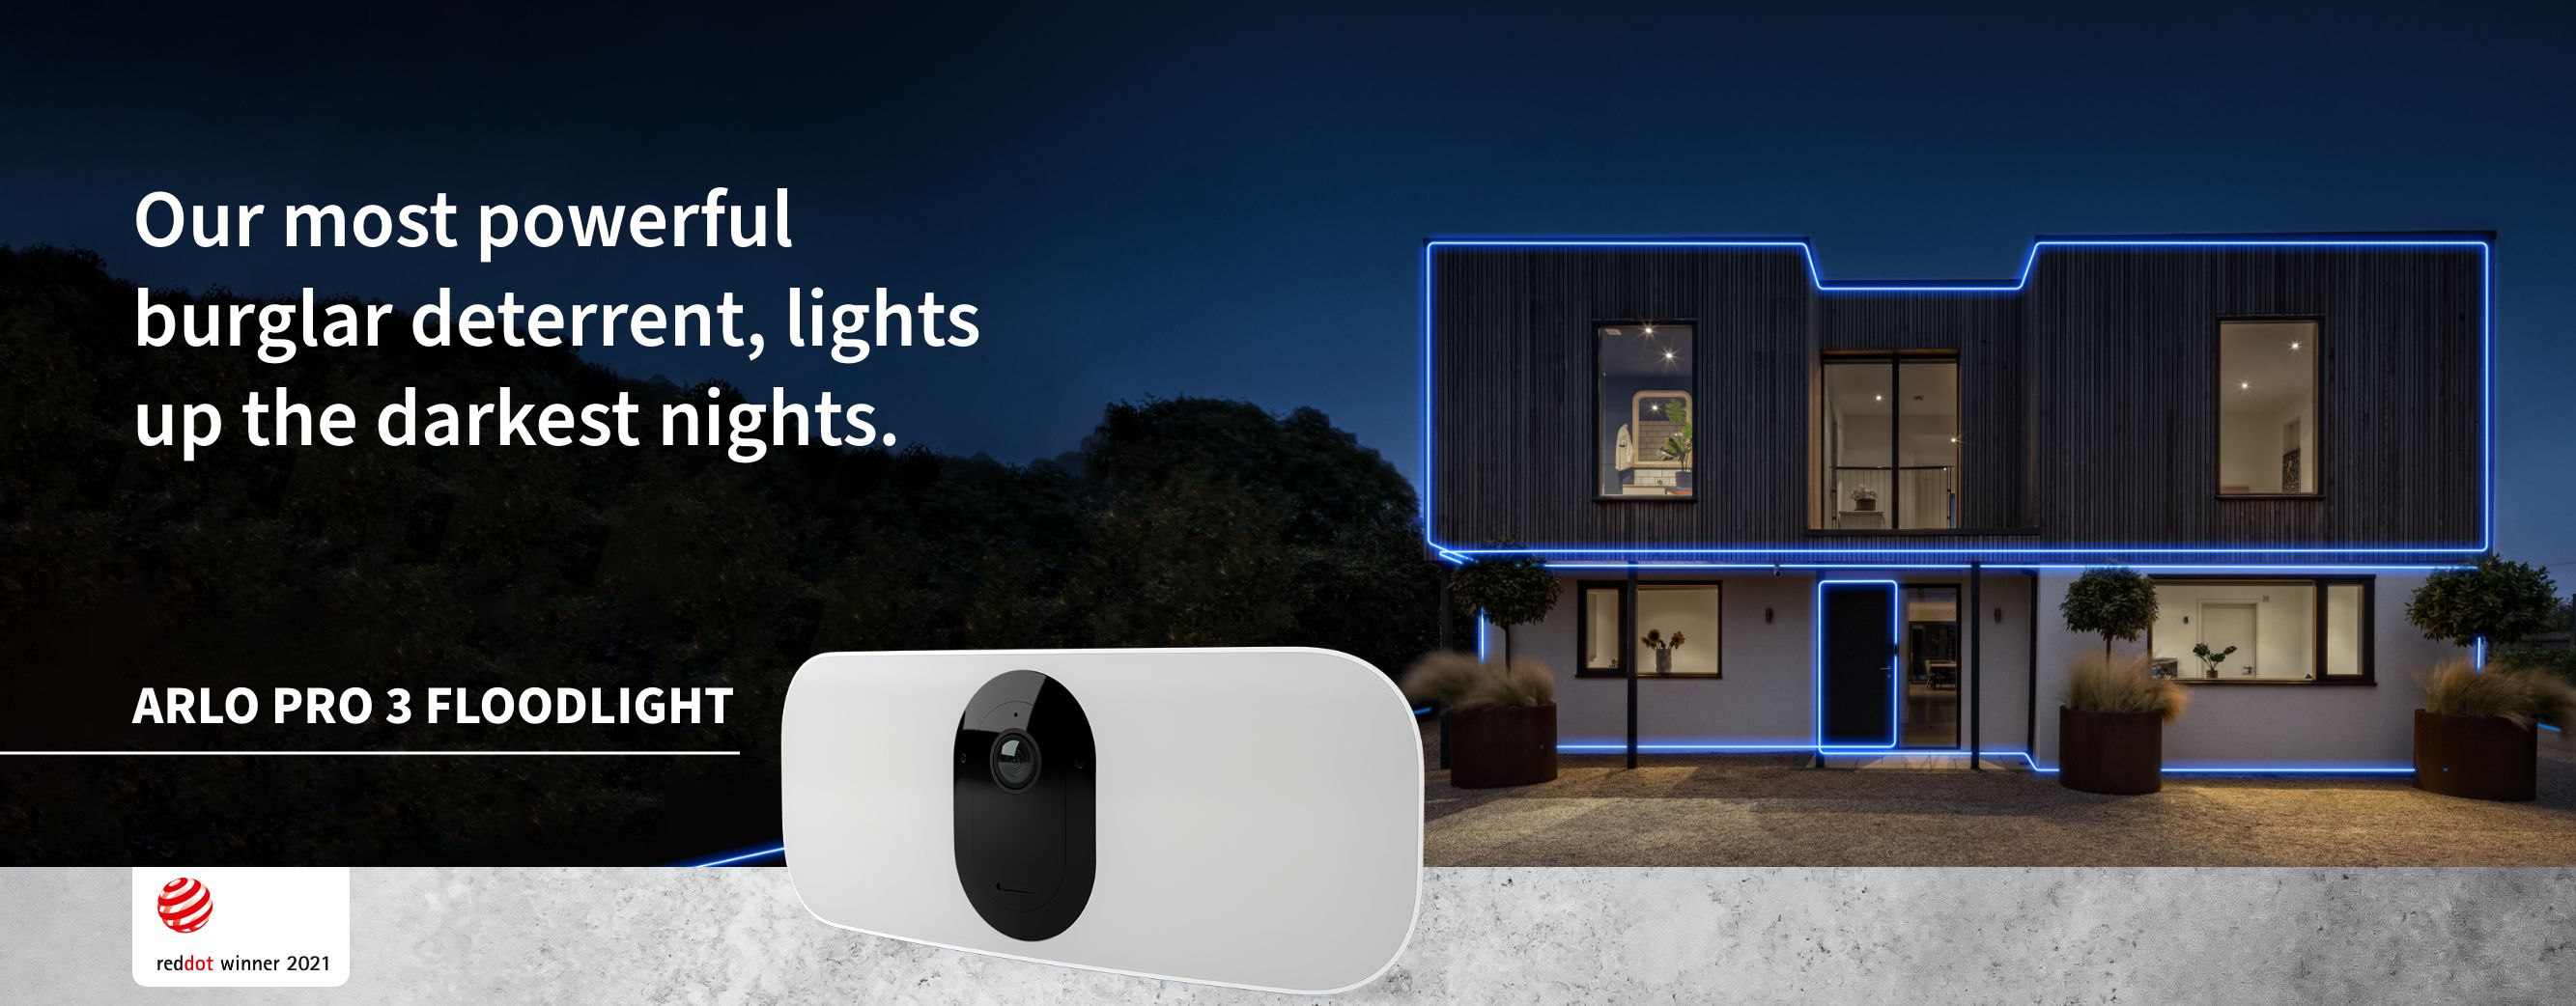 An Arlo Pro 3 Floodlight security camera attached to a wall outside shines a powerful shield of light  at night 